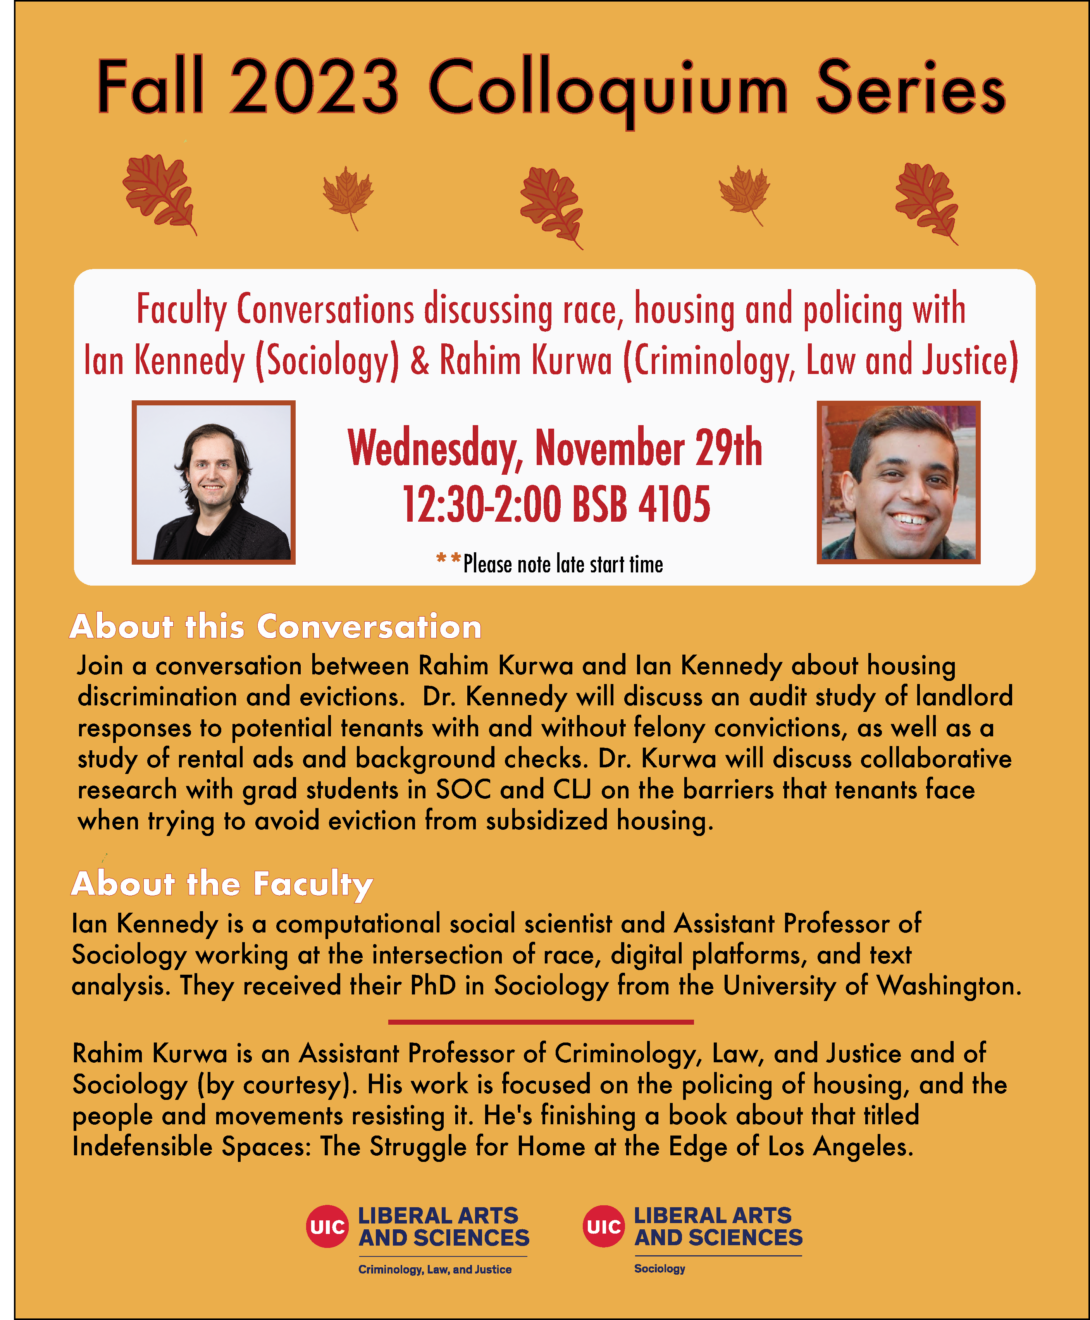 Fall 2023 Colloquium Series: Wednesday, November 29th Flyer